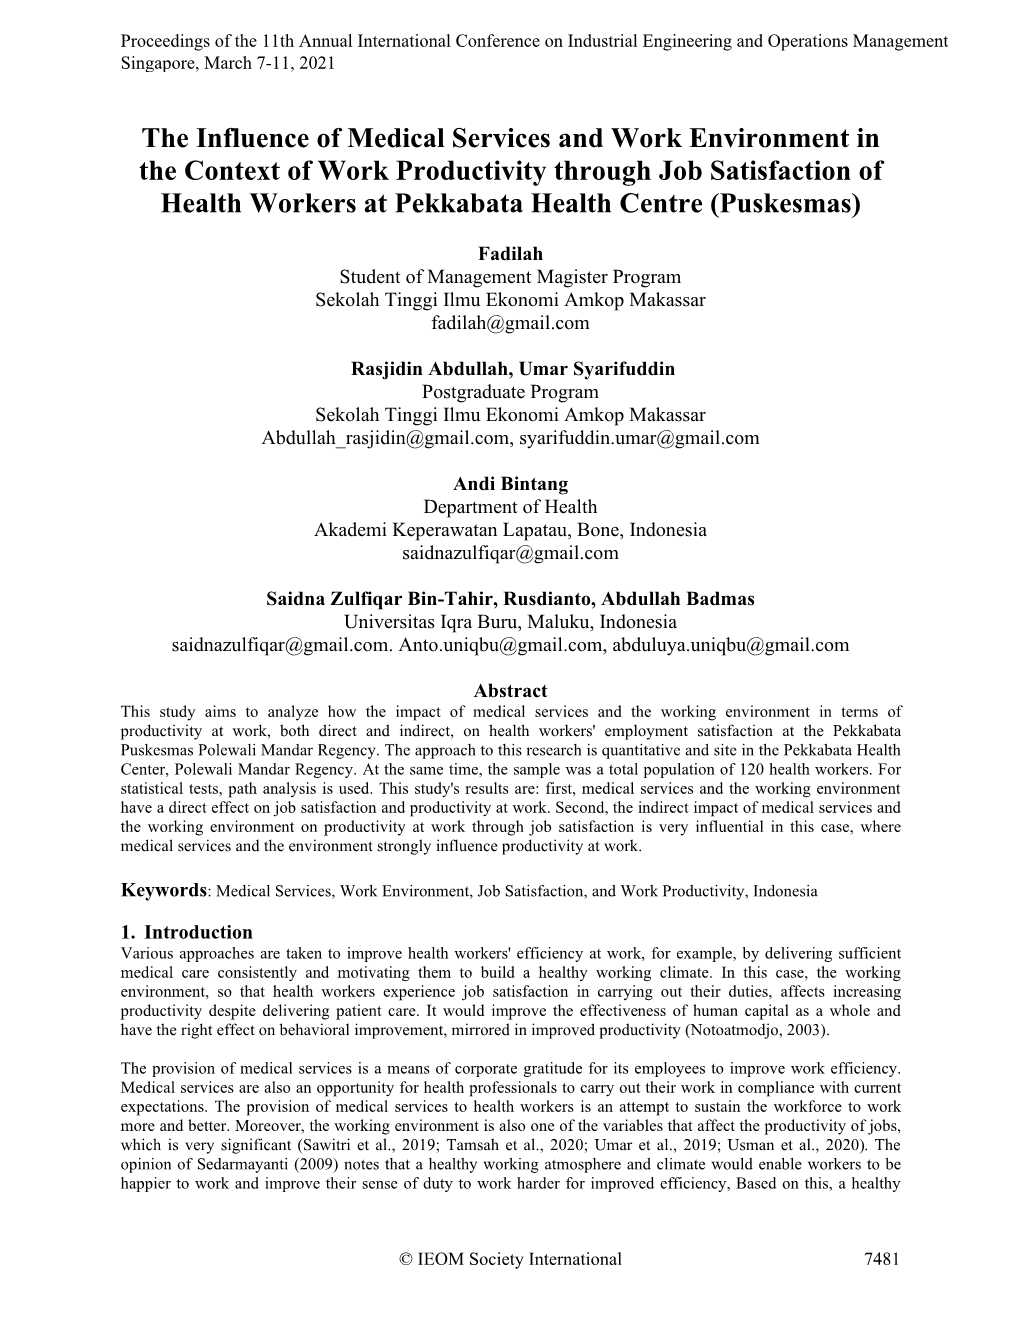 The Influence of Medical Services and Work Environment in the Context of Work Productivity Through Job Satisfaction of Health Wo